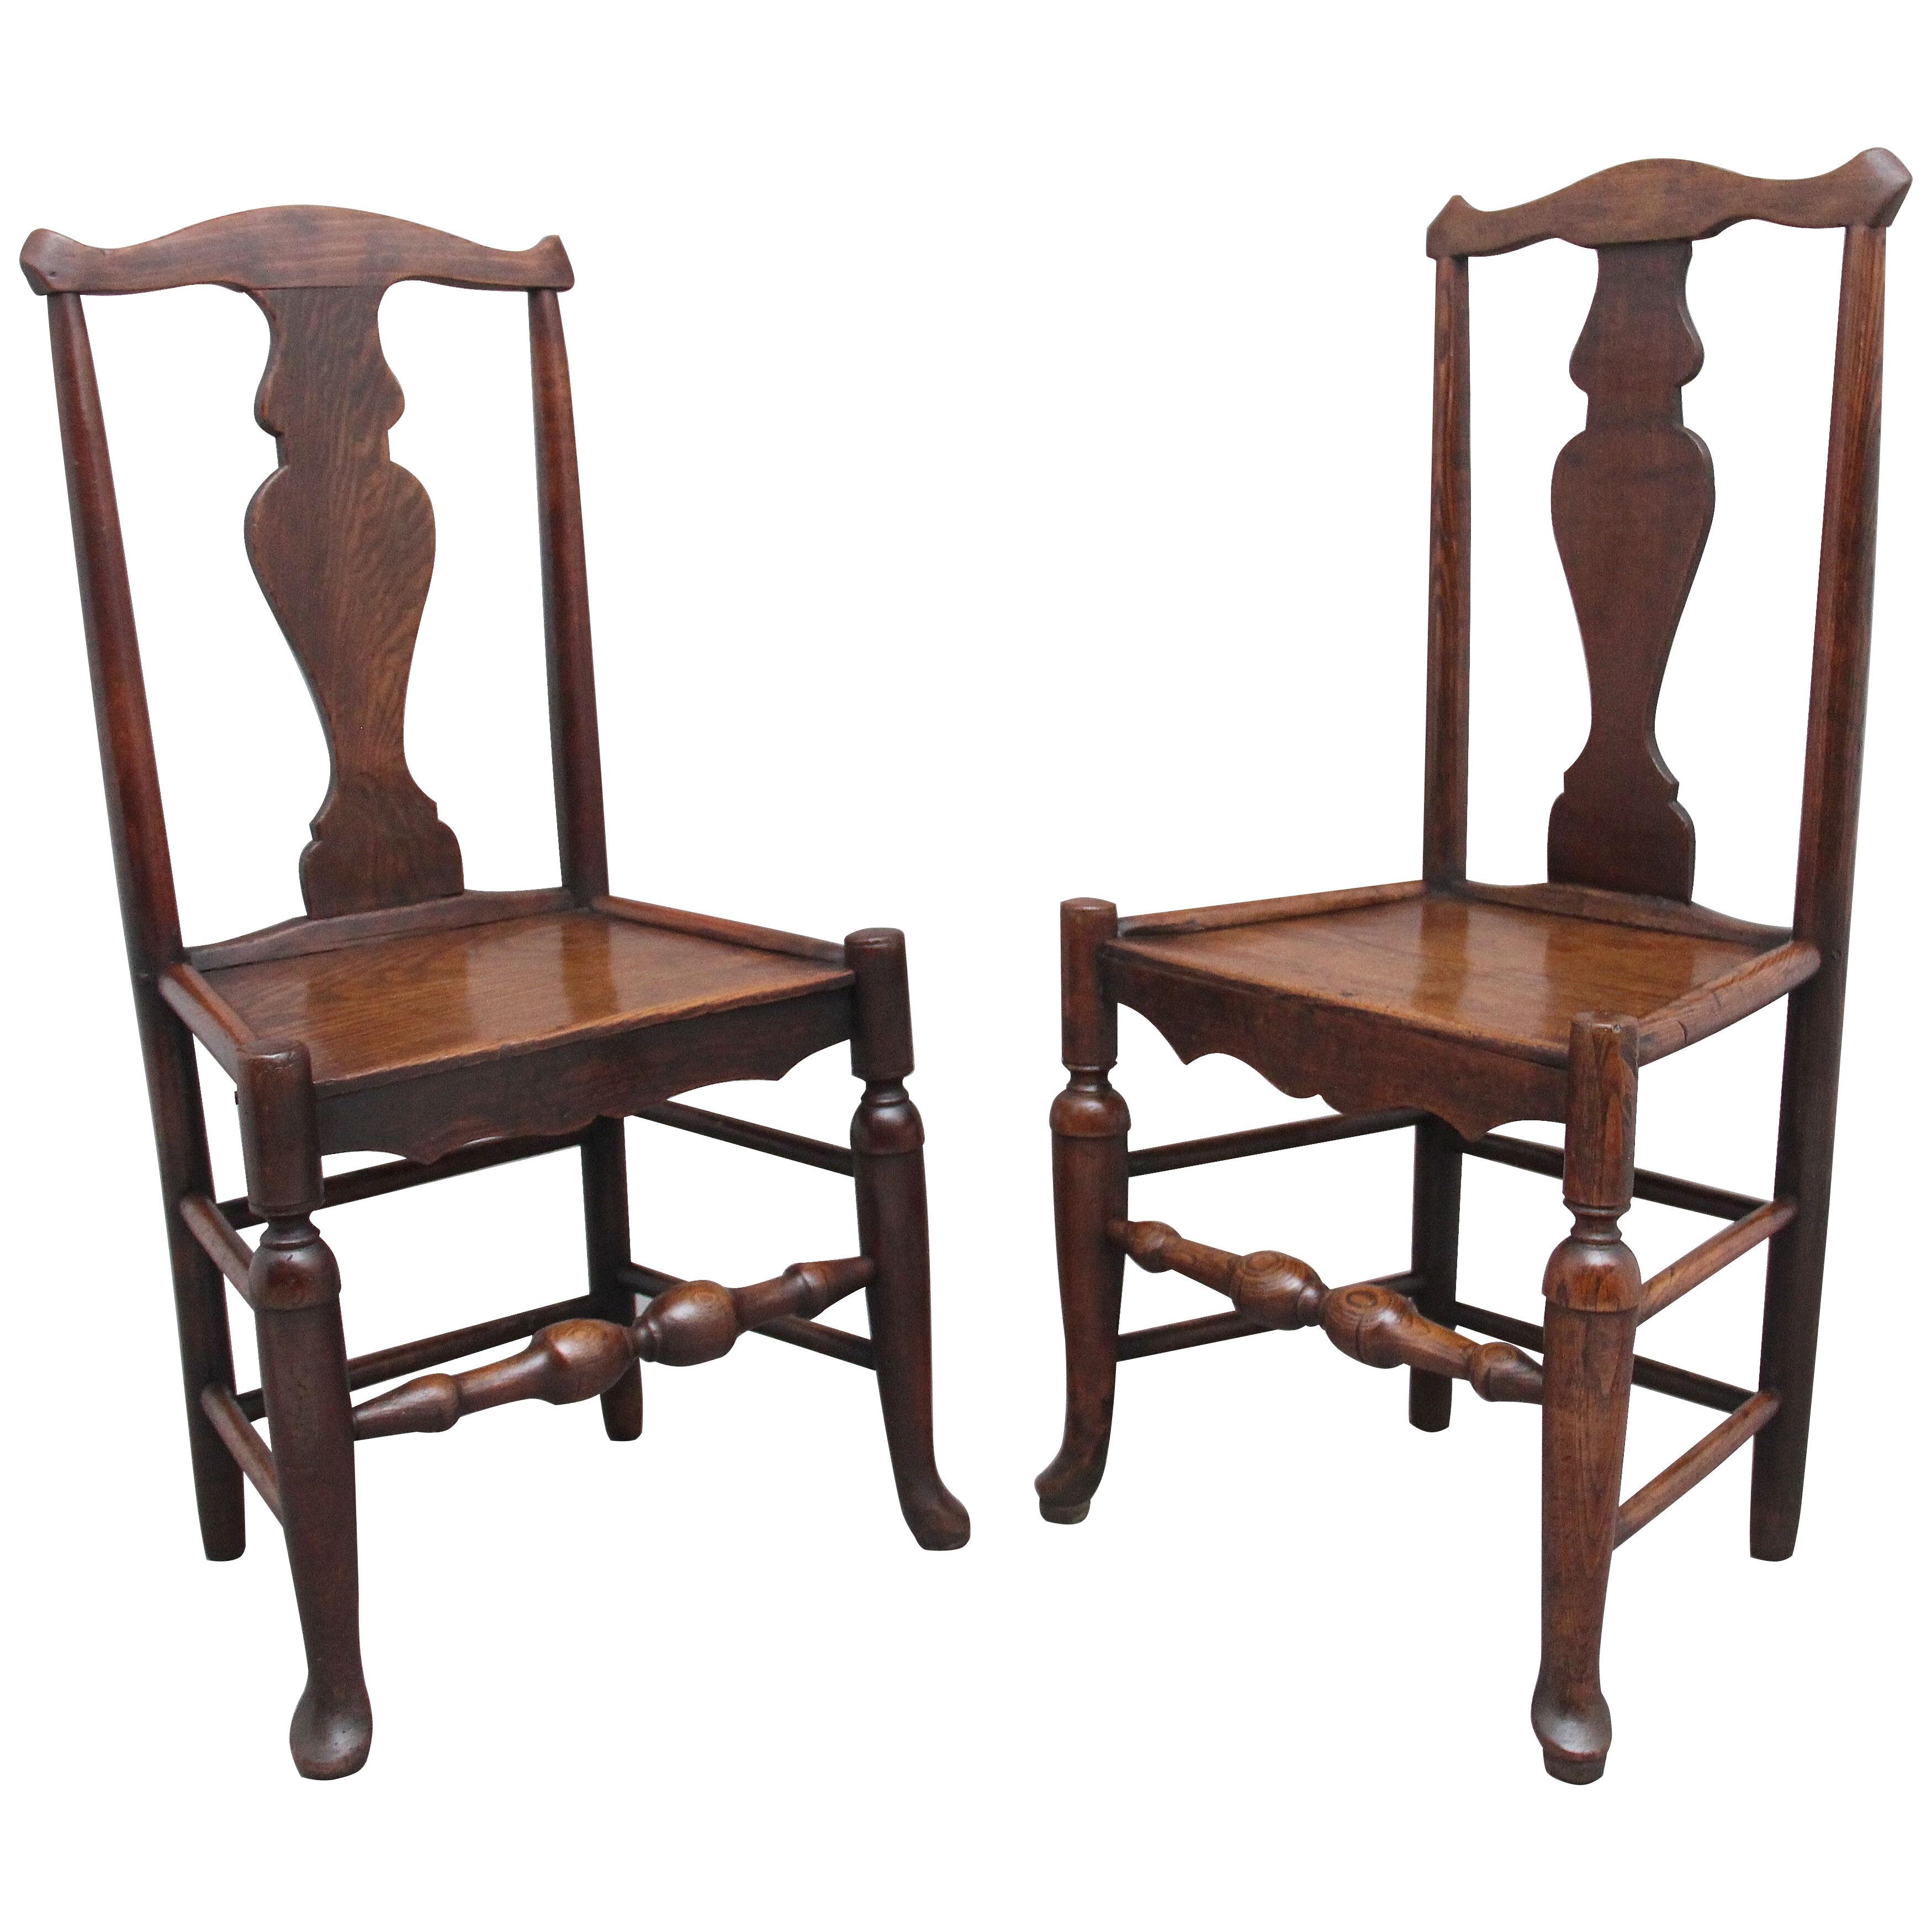 Pair of 18th Century antique elm side chairs